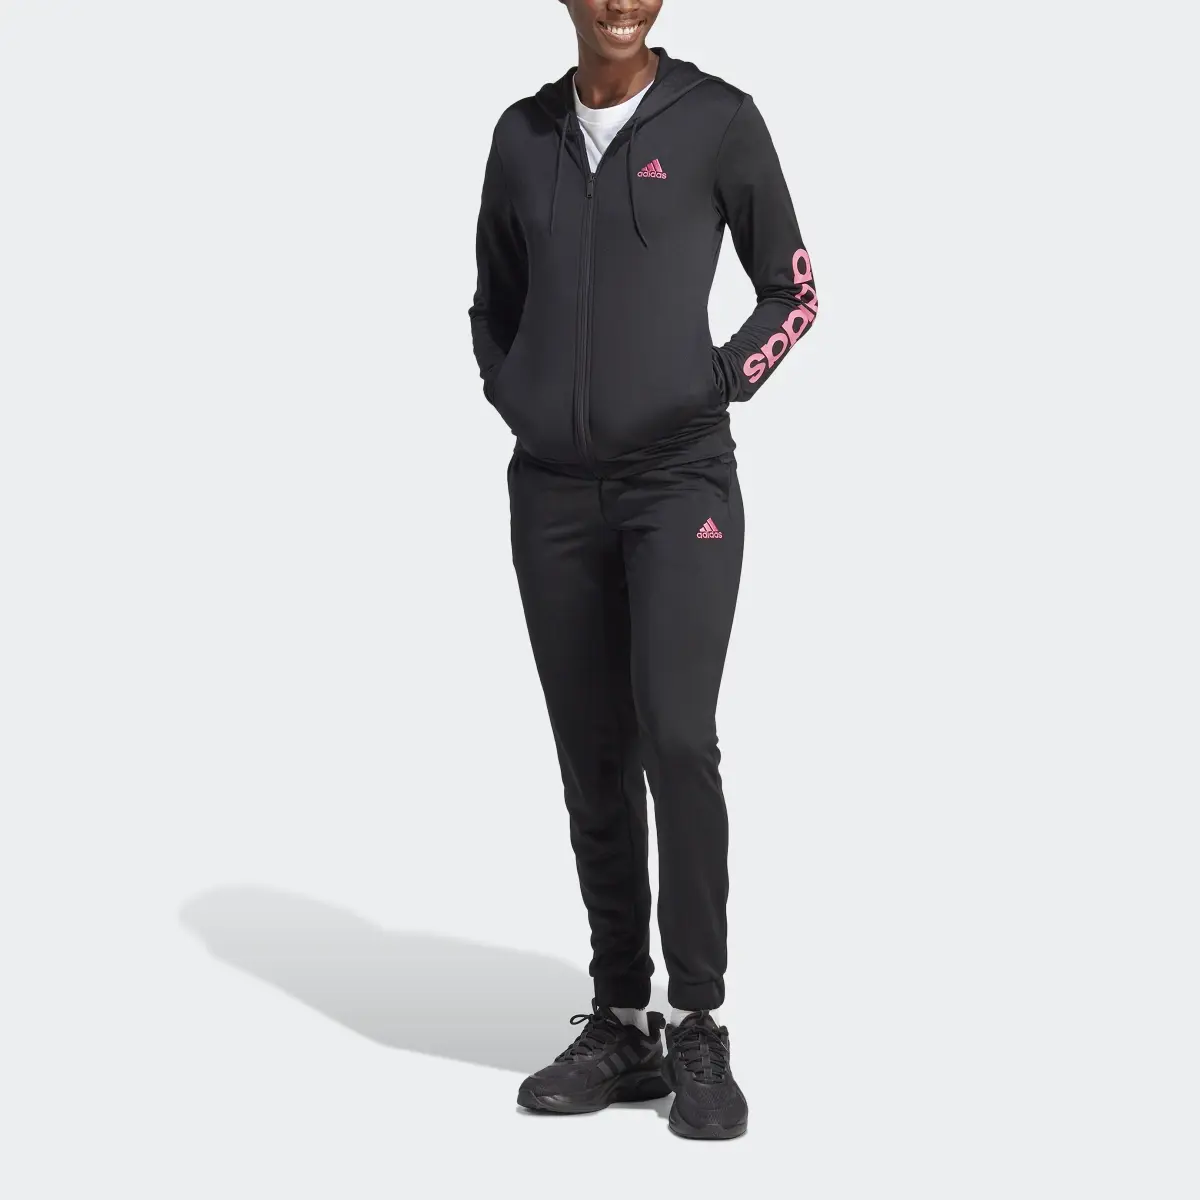 Adidas Linear Track Suit. 1